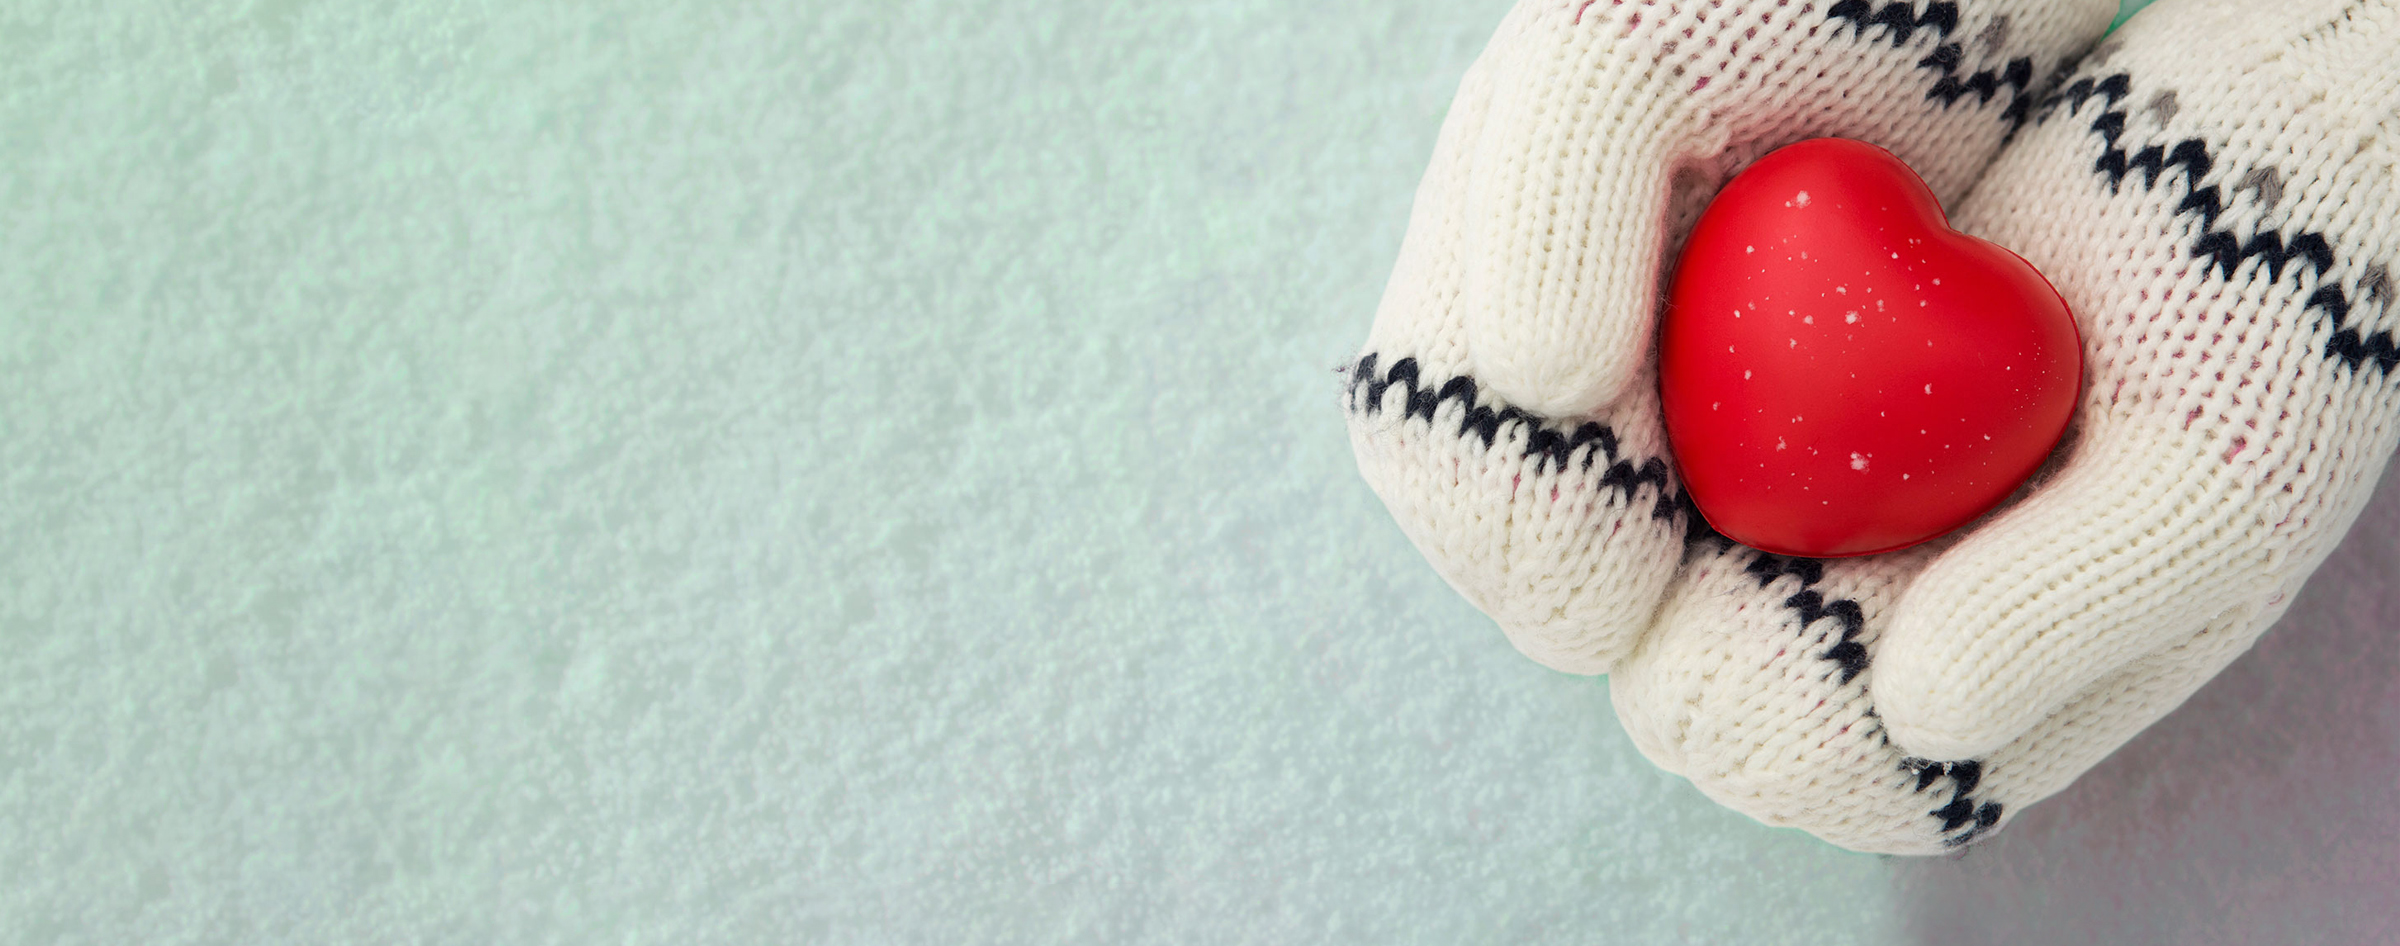 In the snow, warm mittens hold a red heart with care.